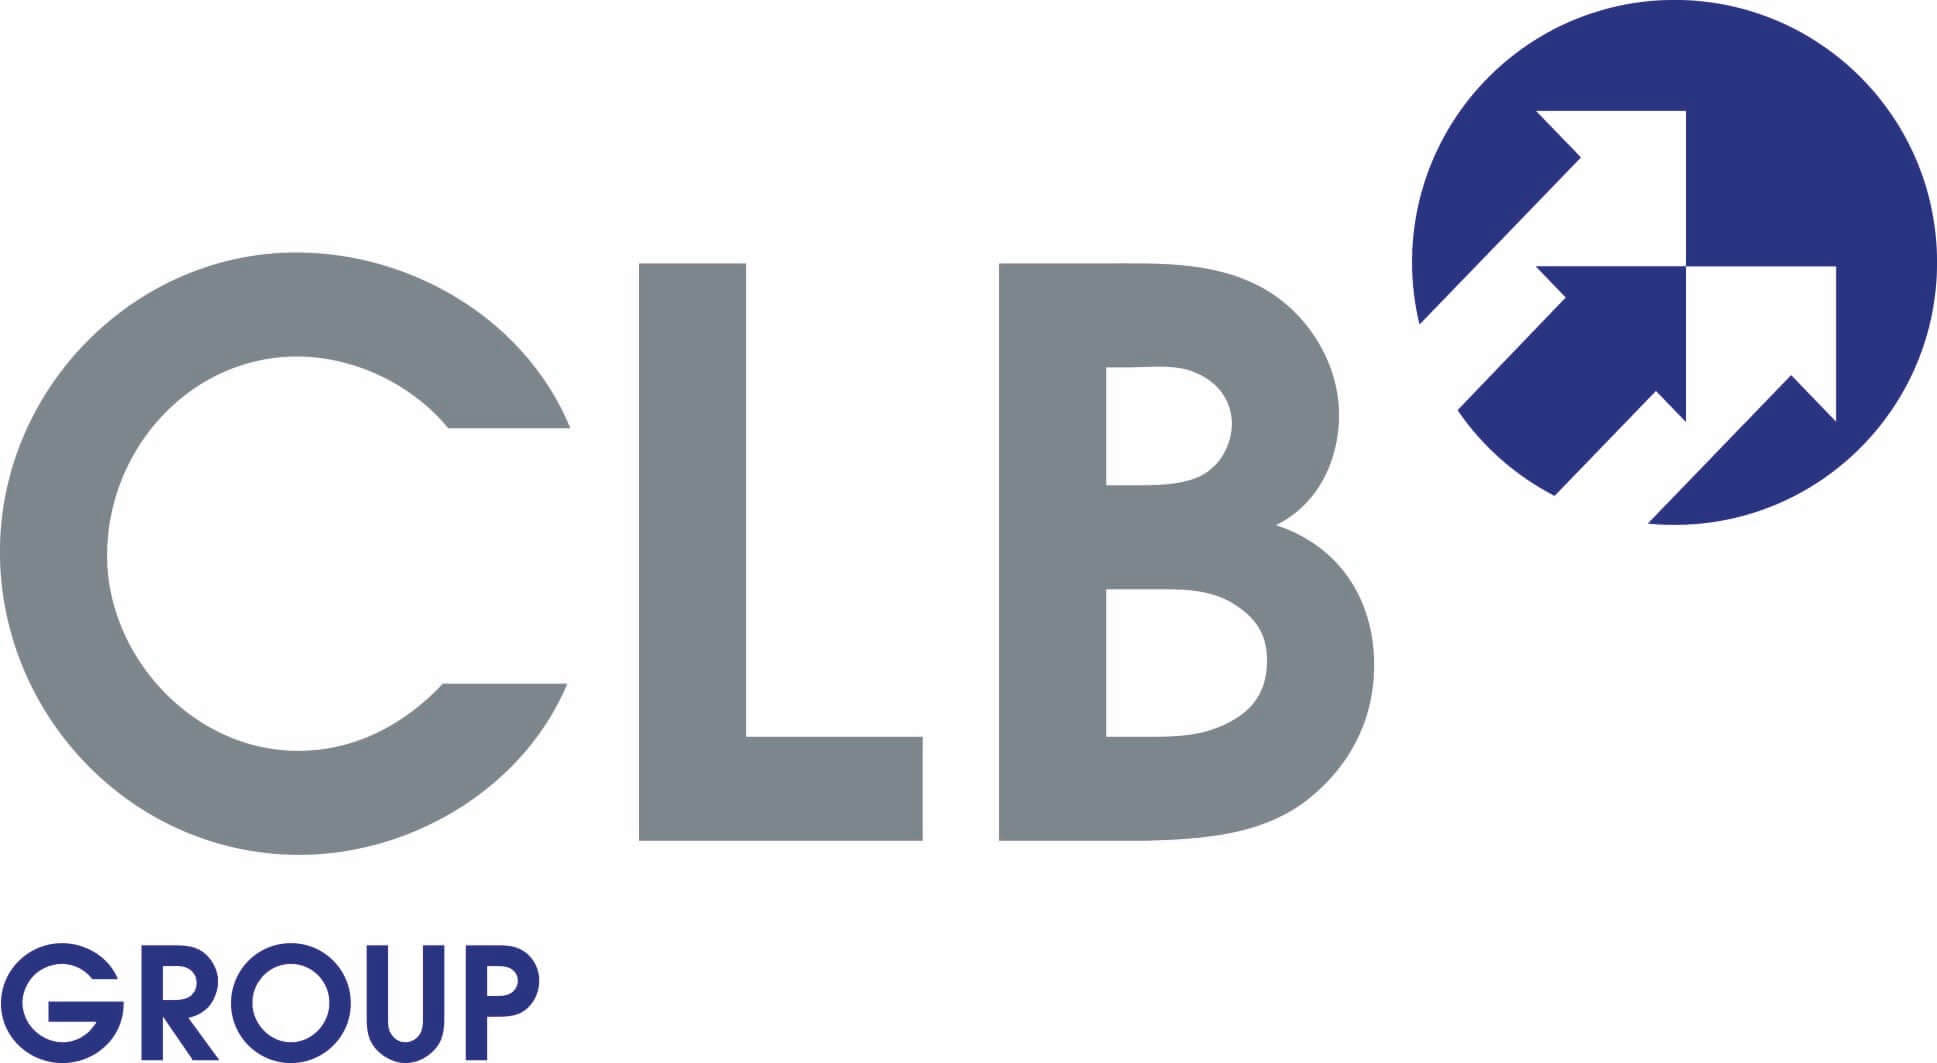 CLB group